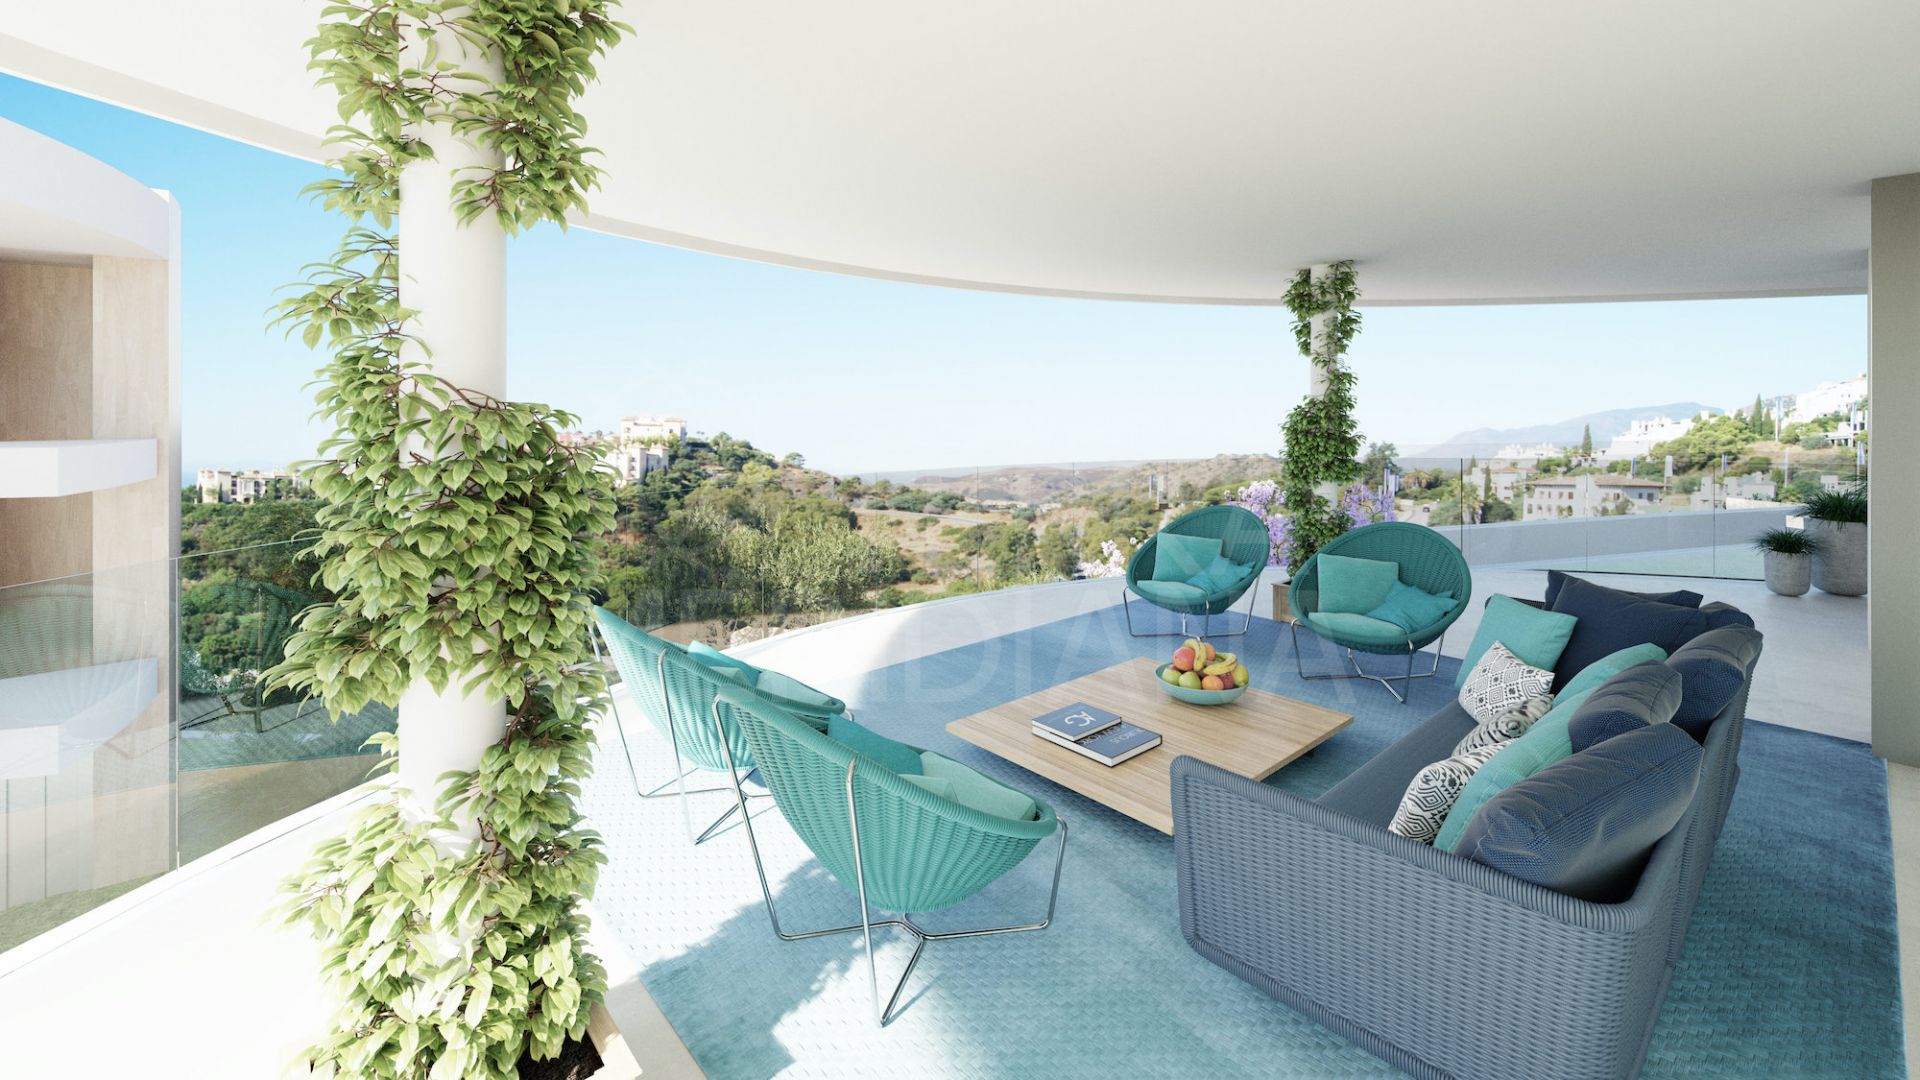 Off-plan 3 bedroom first floor apartment with knockout views for sale The View Marbella, Benahavis